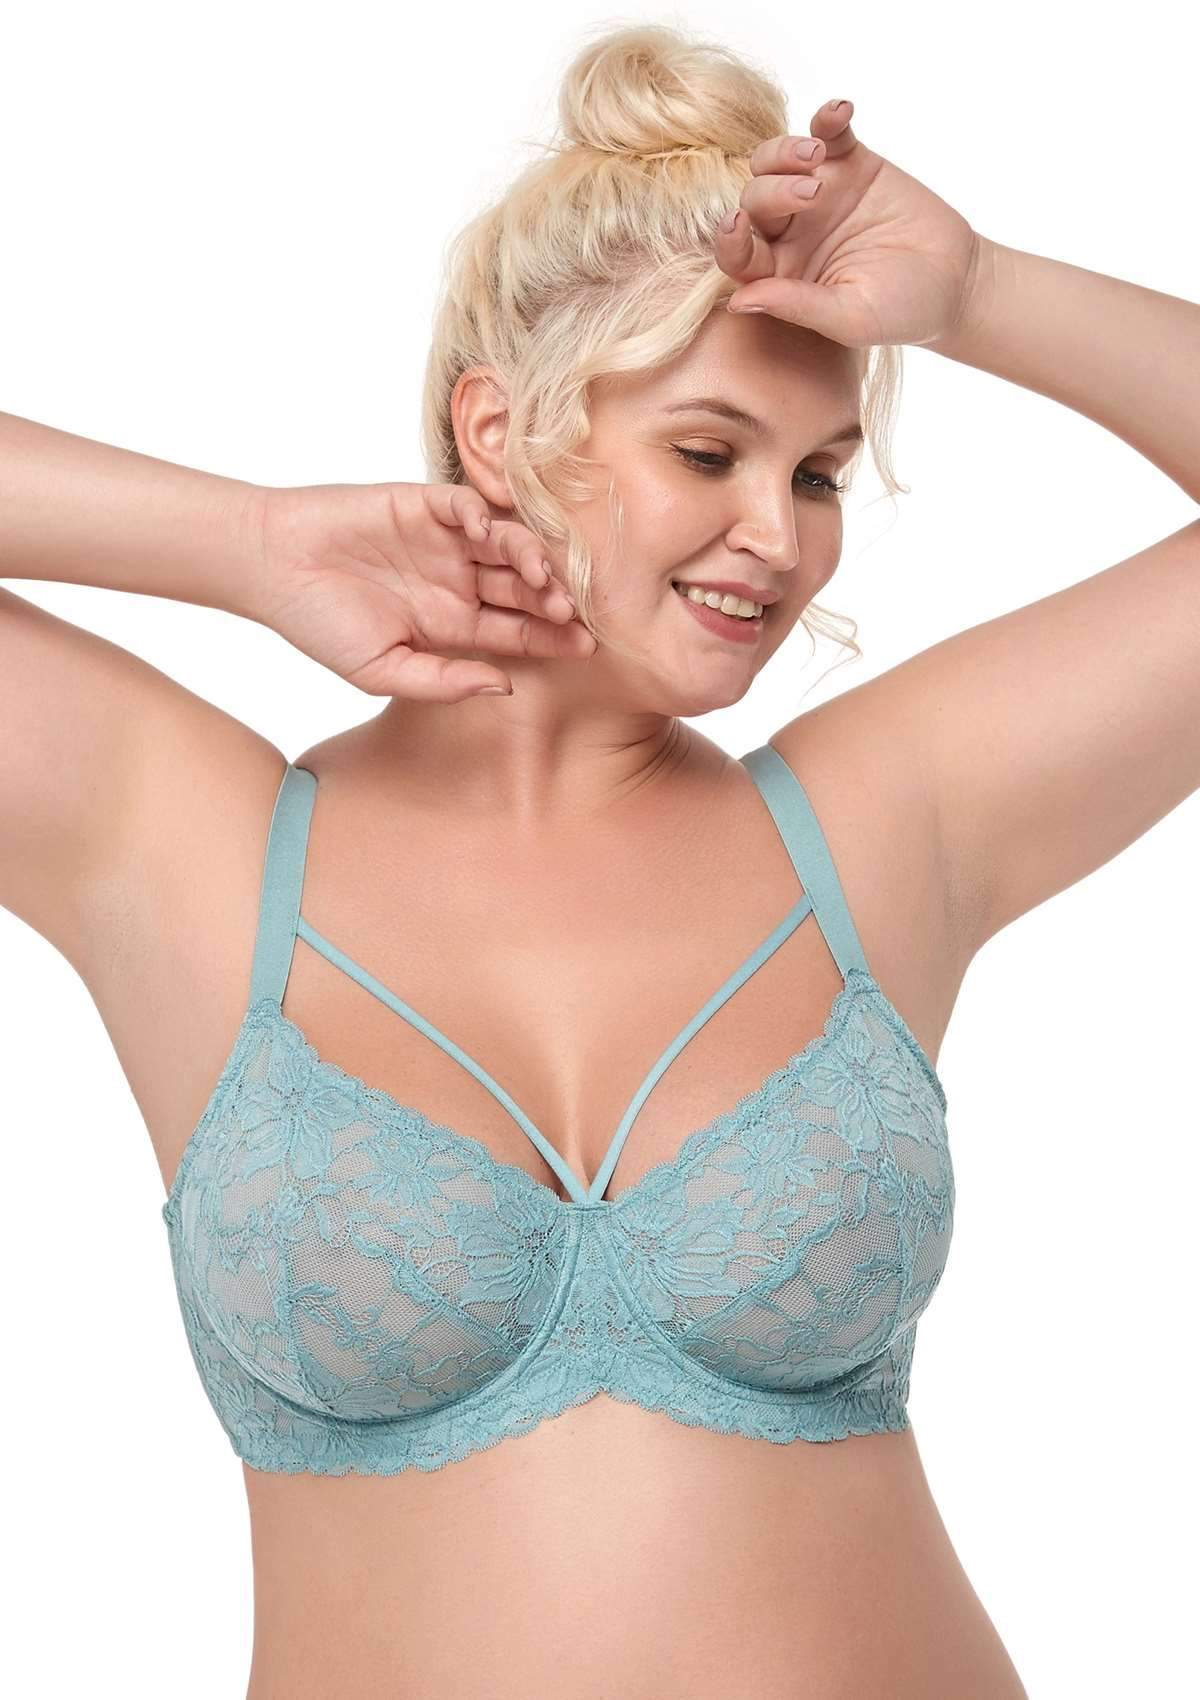 HSIA Pretty In Petals Unlined Lace Bra: Comfortable And Supportive Bra - Pewter Blue / 38 / C